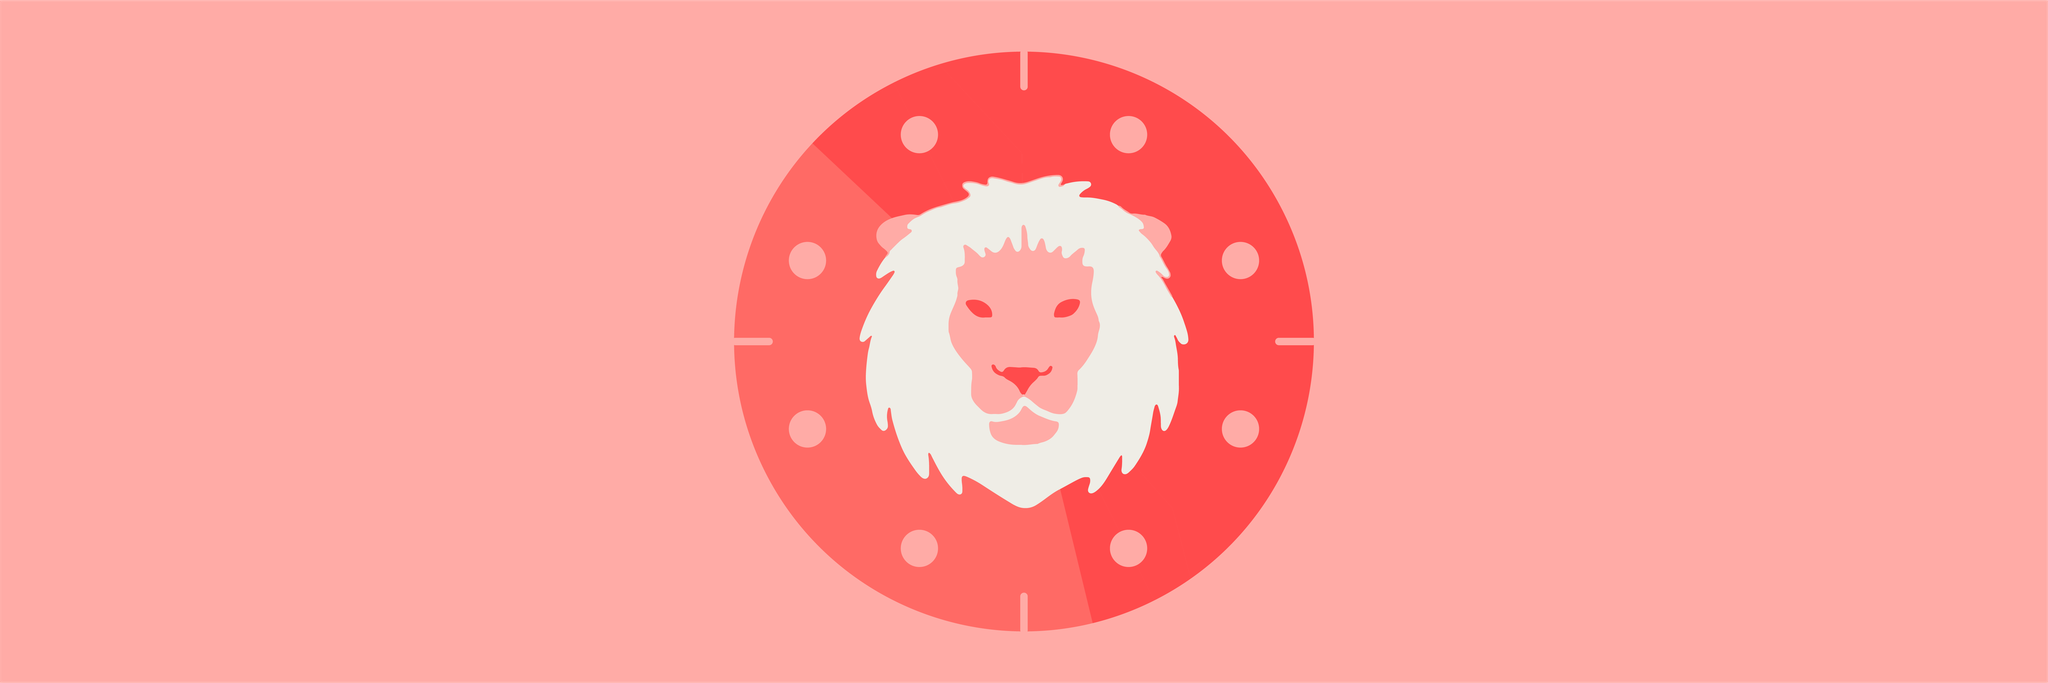 The head of a lion in the center of a clock represents the lion chronotype.